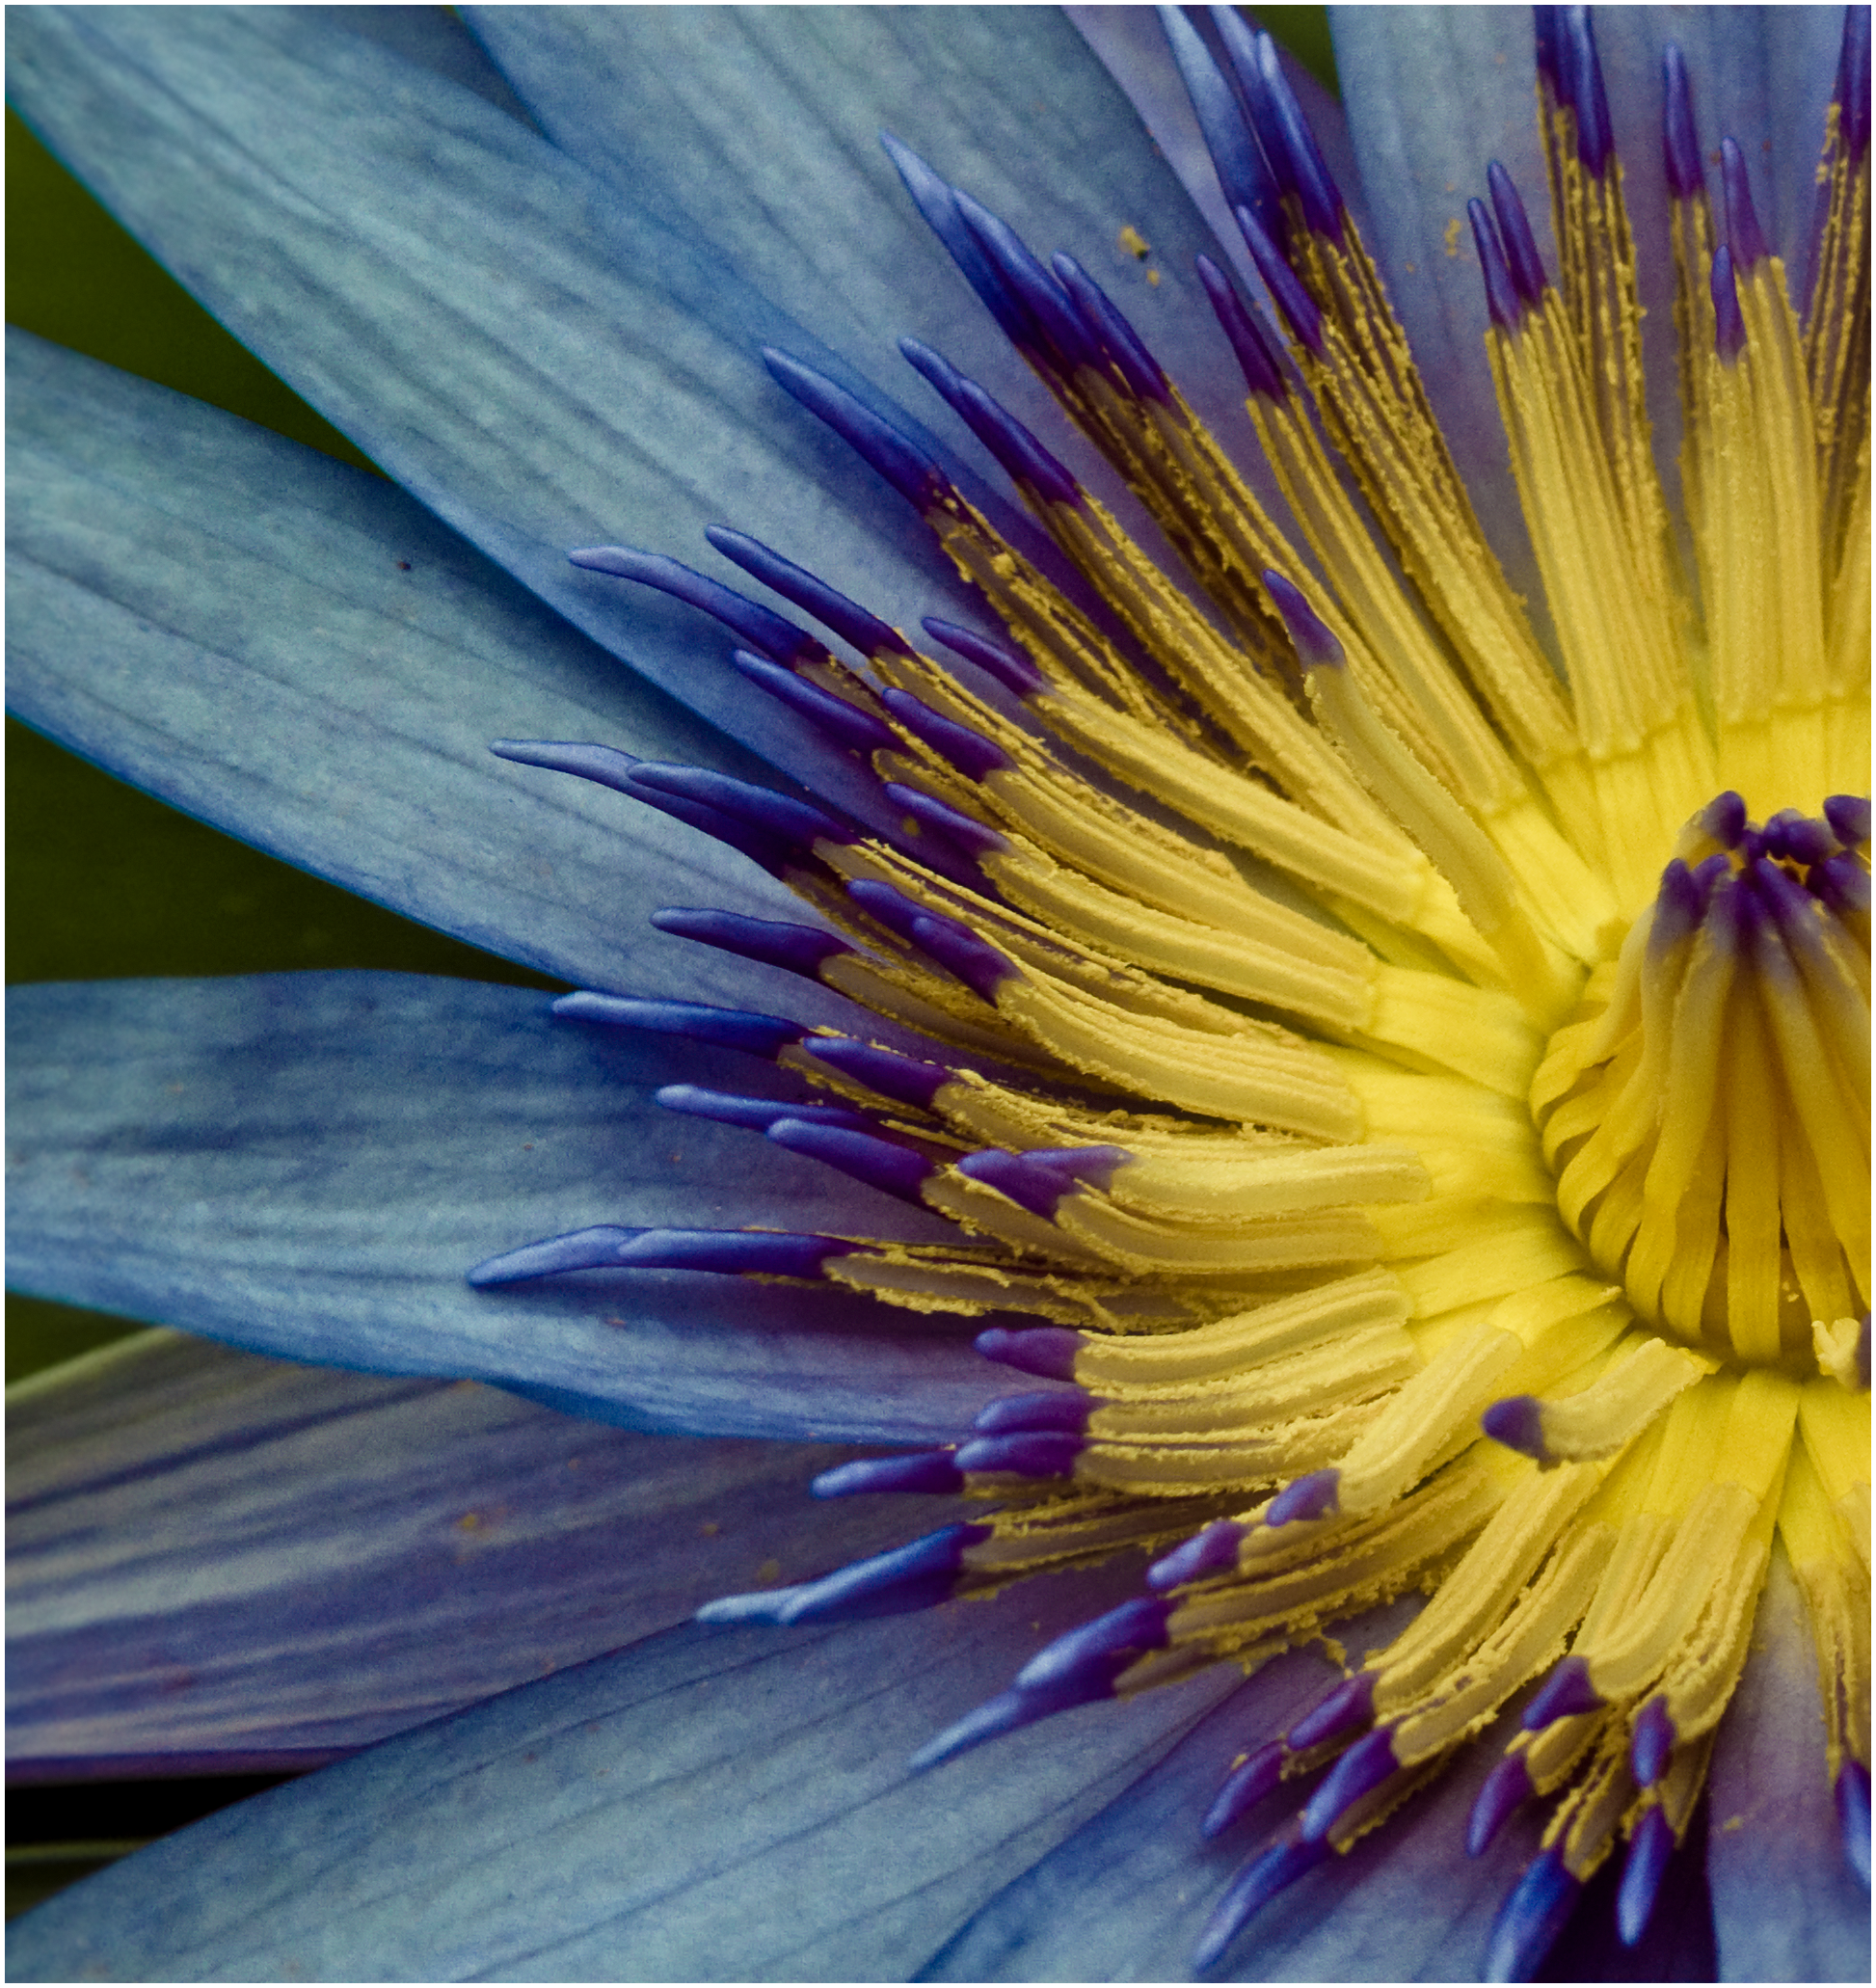 Waterlily flower close up photo